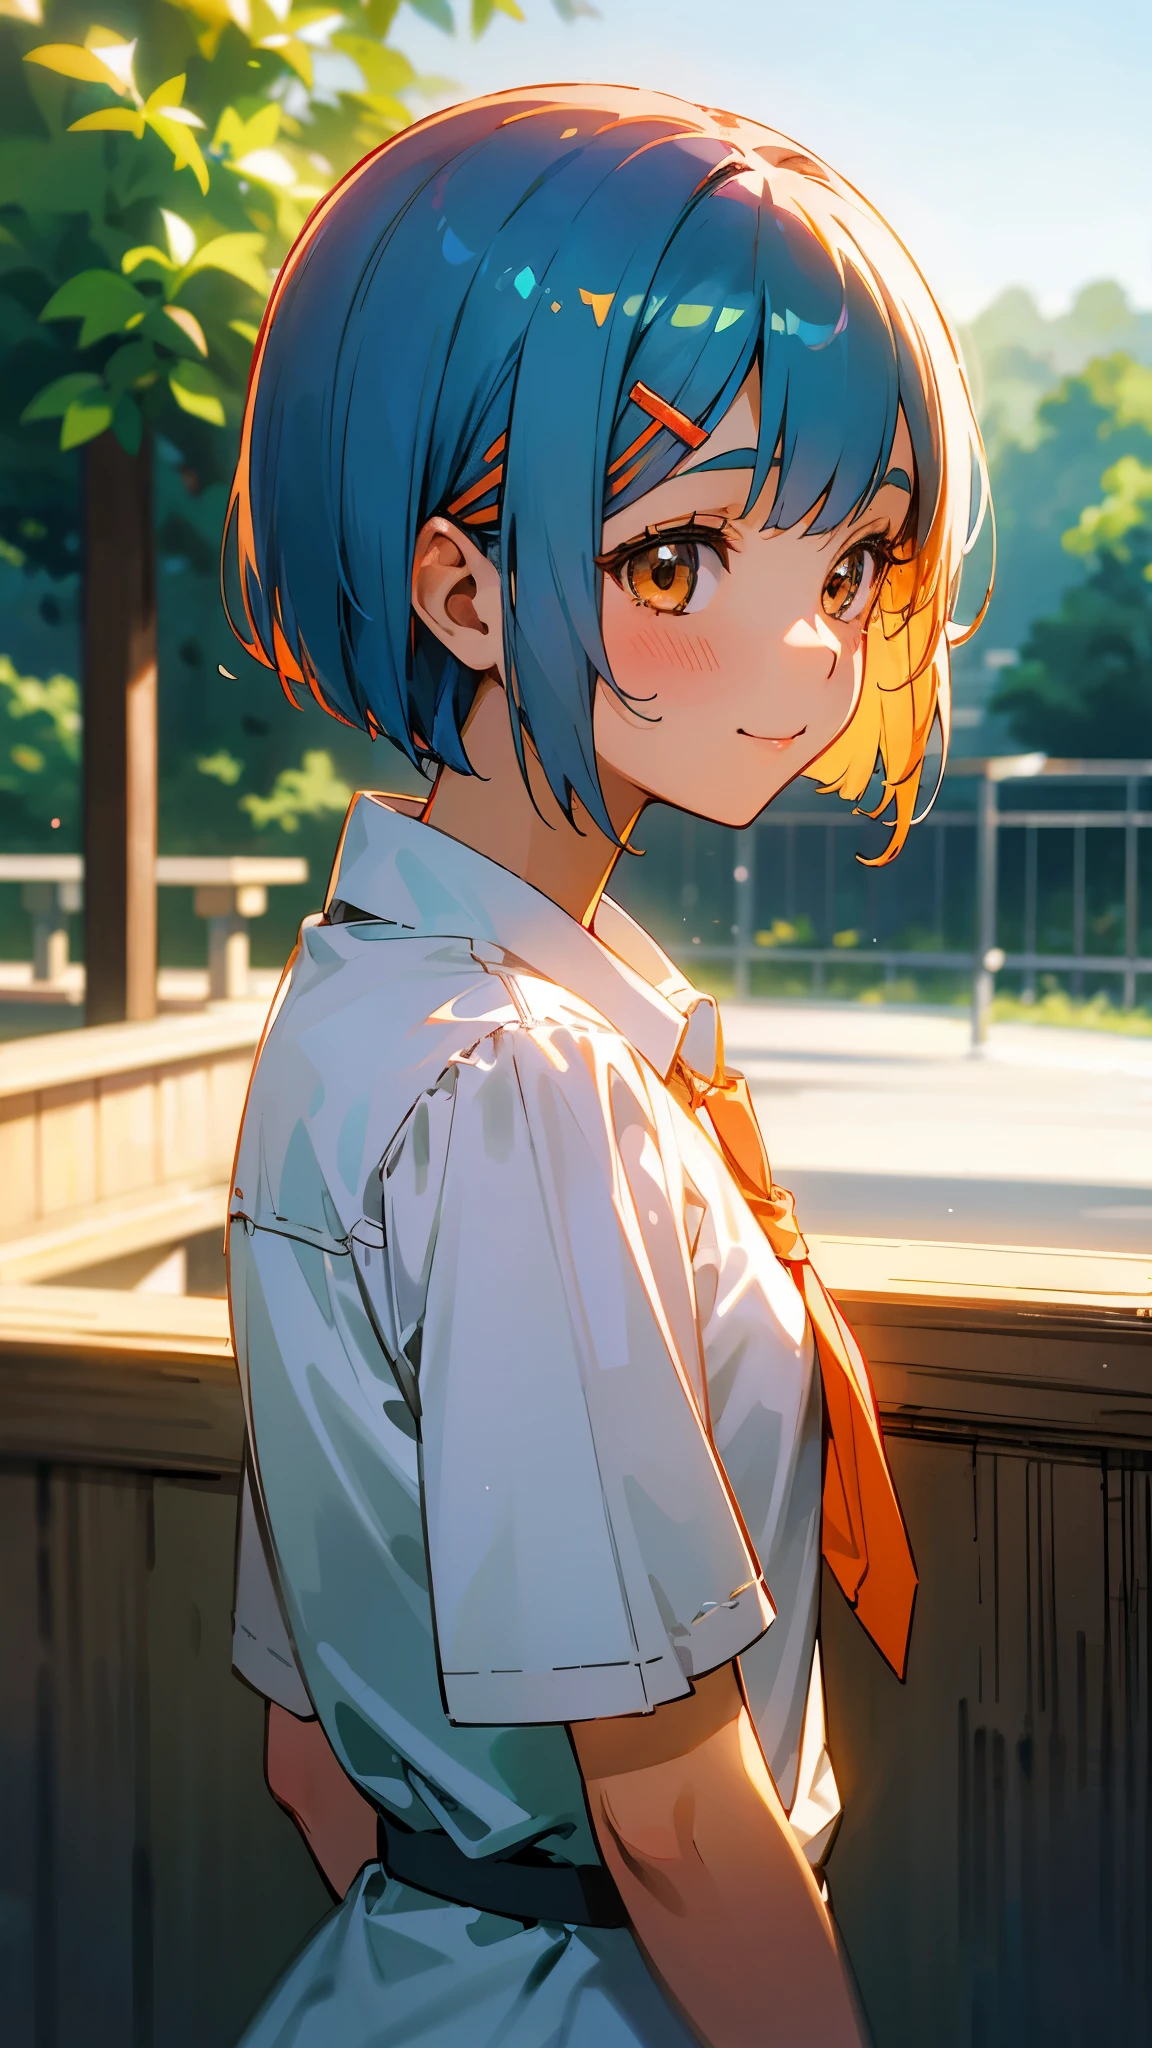 1 girl、anime picture、cute woman、shrimp、Glossy light blue hair、short bob hairstyle、Tie your hair with an orange hair clip、Beautiful brown eyes、smile、From the side、sharp outline、Morning Cafe Terrace、background bokeh、written boundary depth